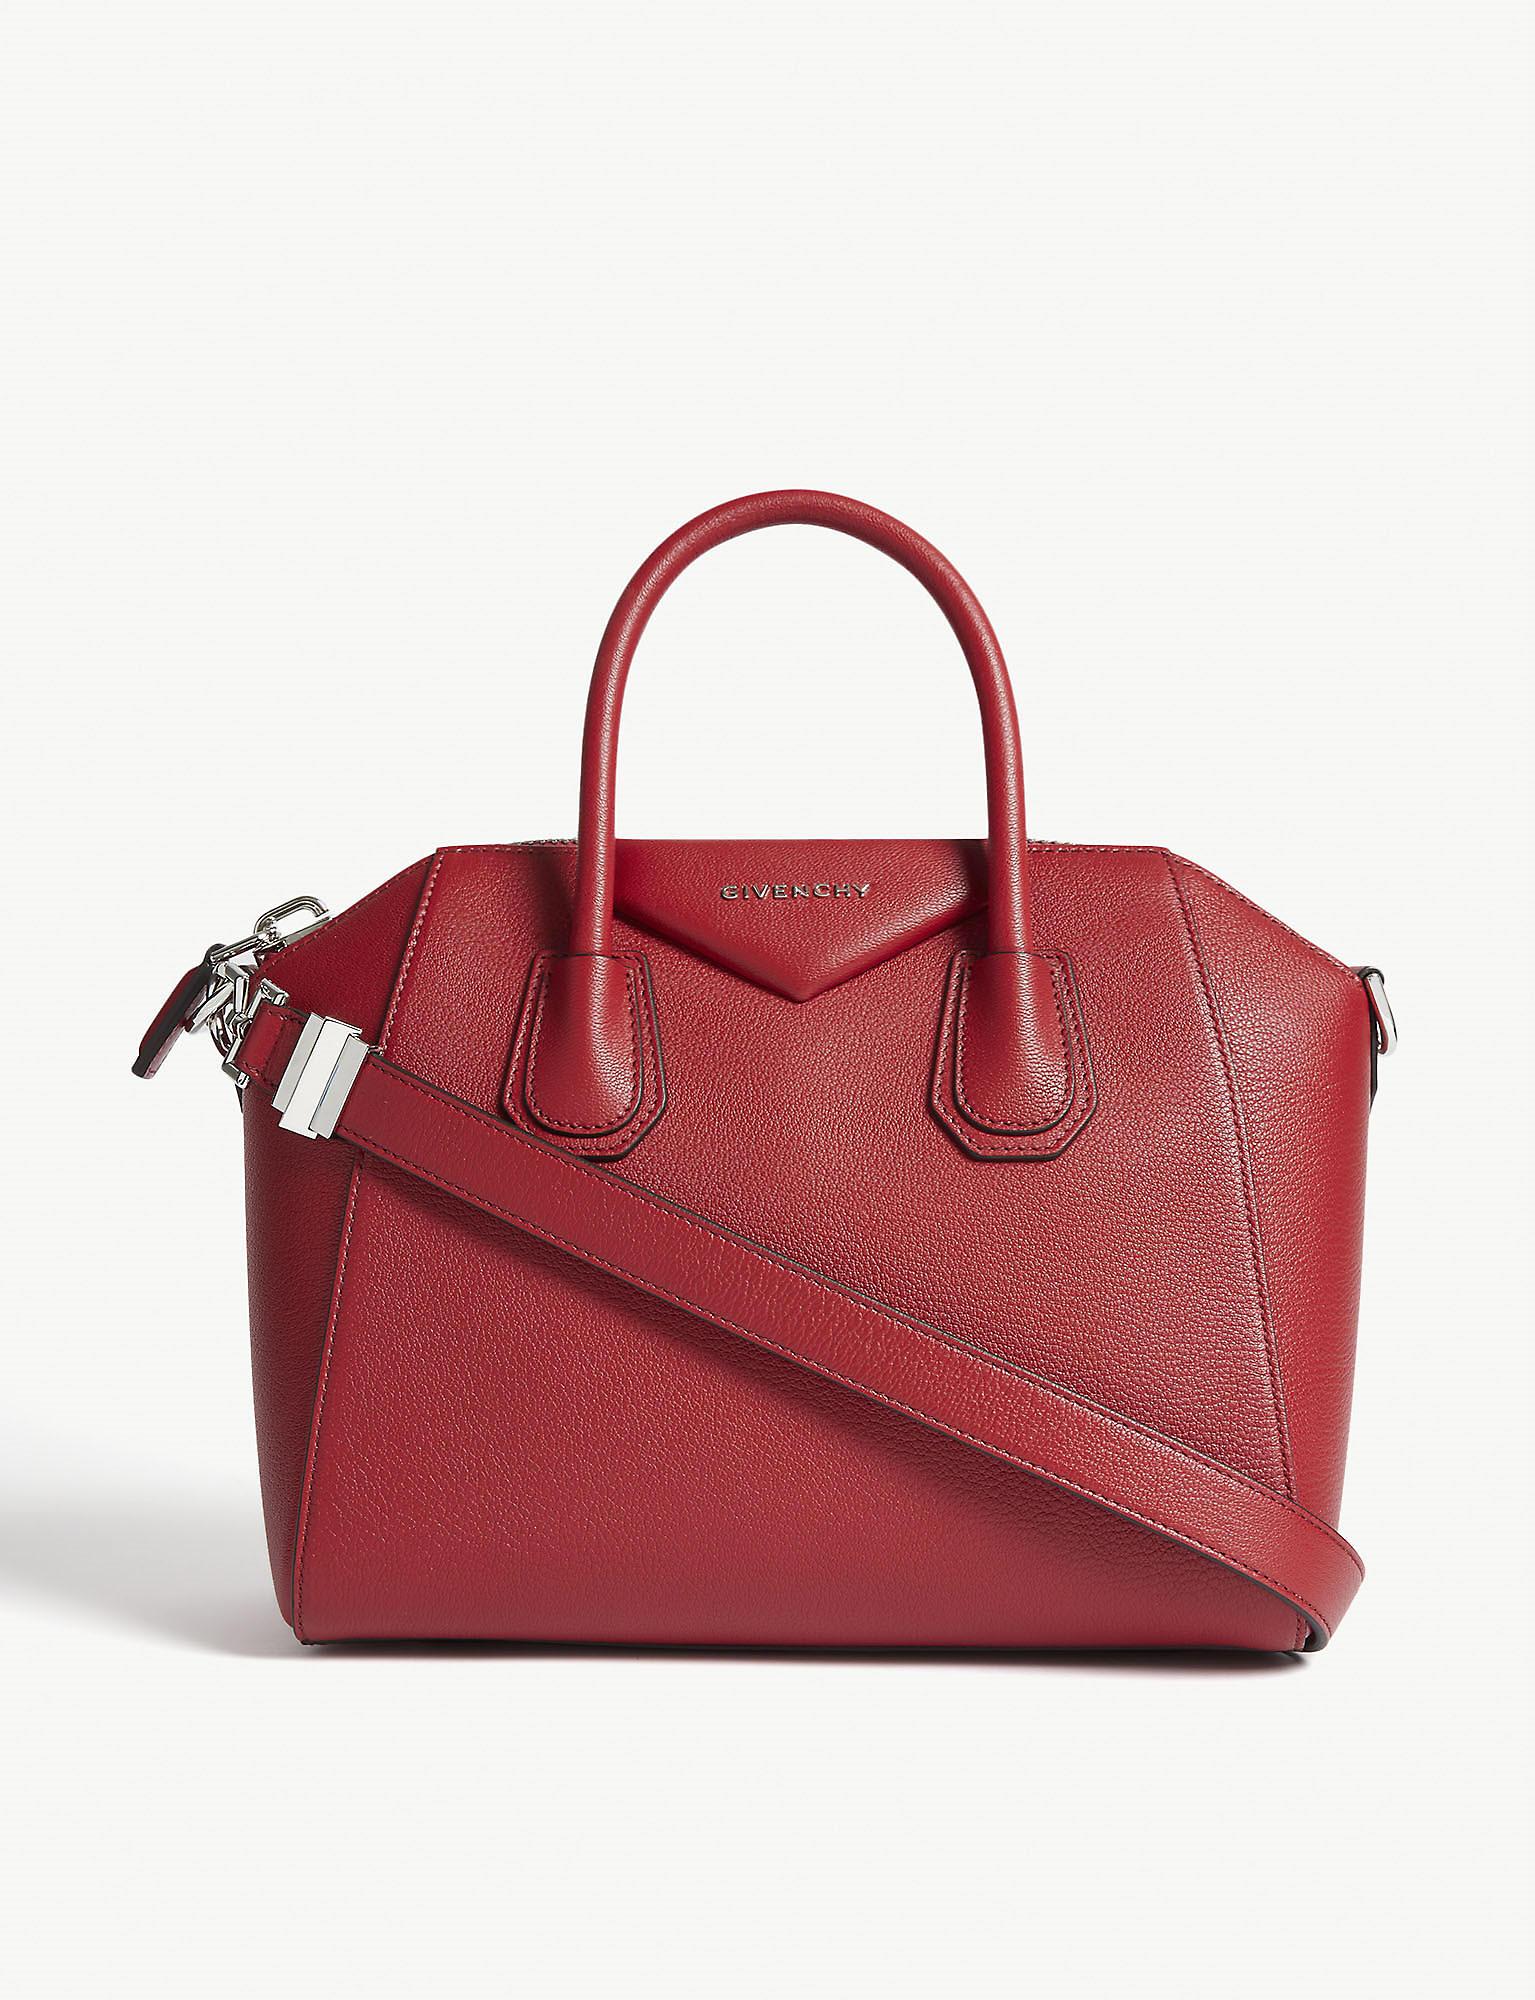 Givenchy Antigona Sugar Small Leather Tote Bag in Red - Lyst